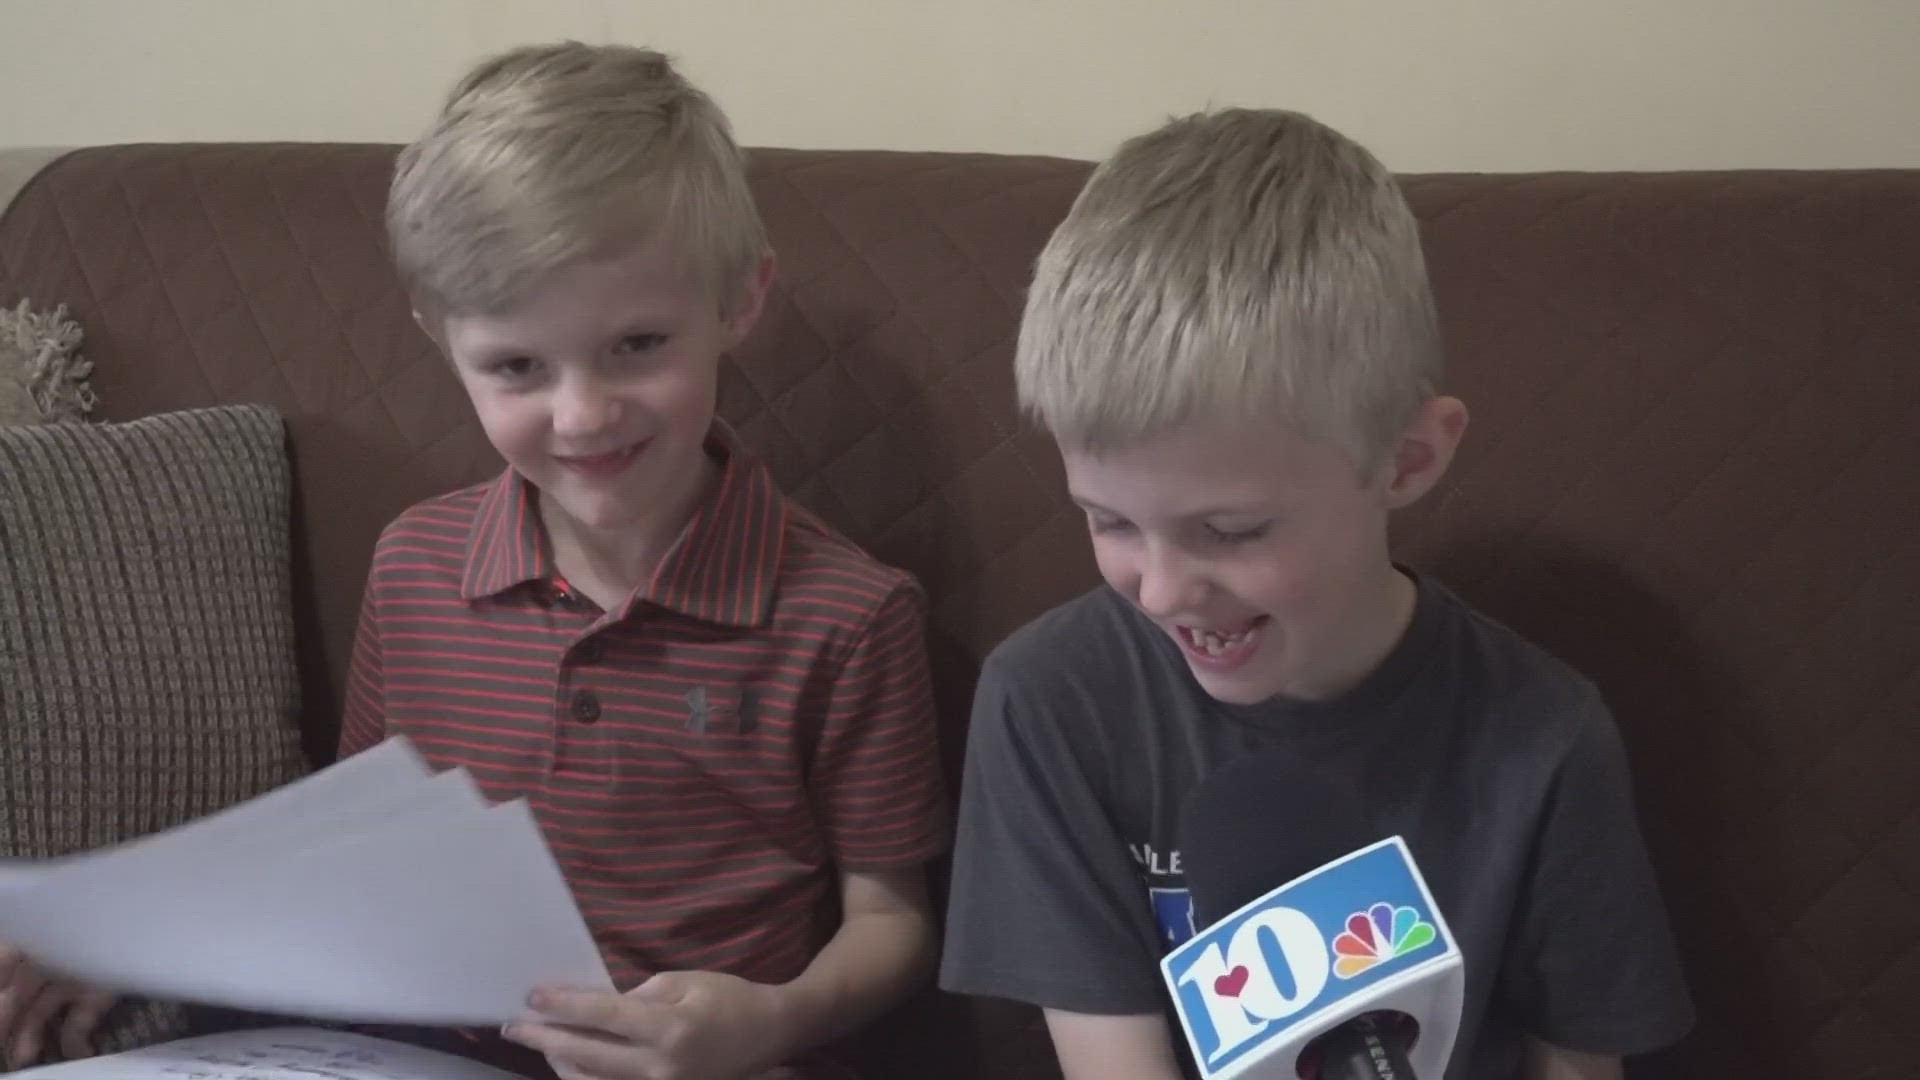 Both boys were excited to get their summer started, but TCAP exam changed those plans.